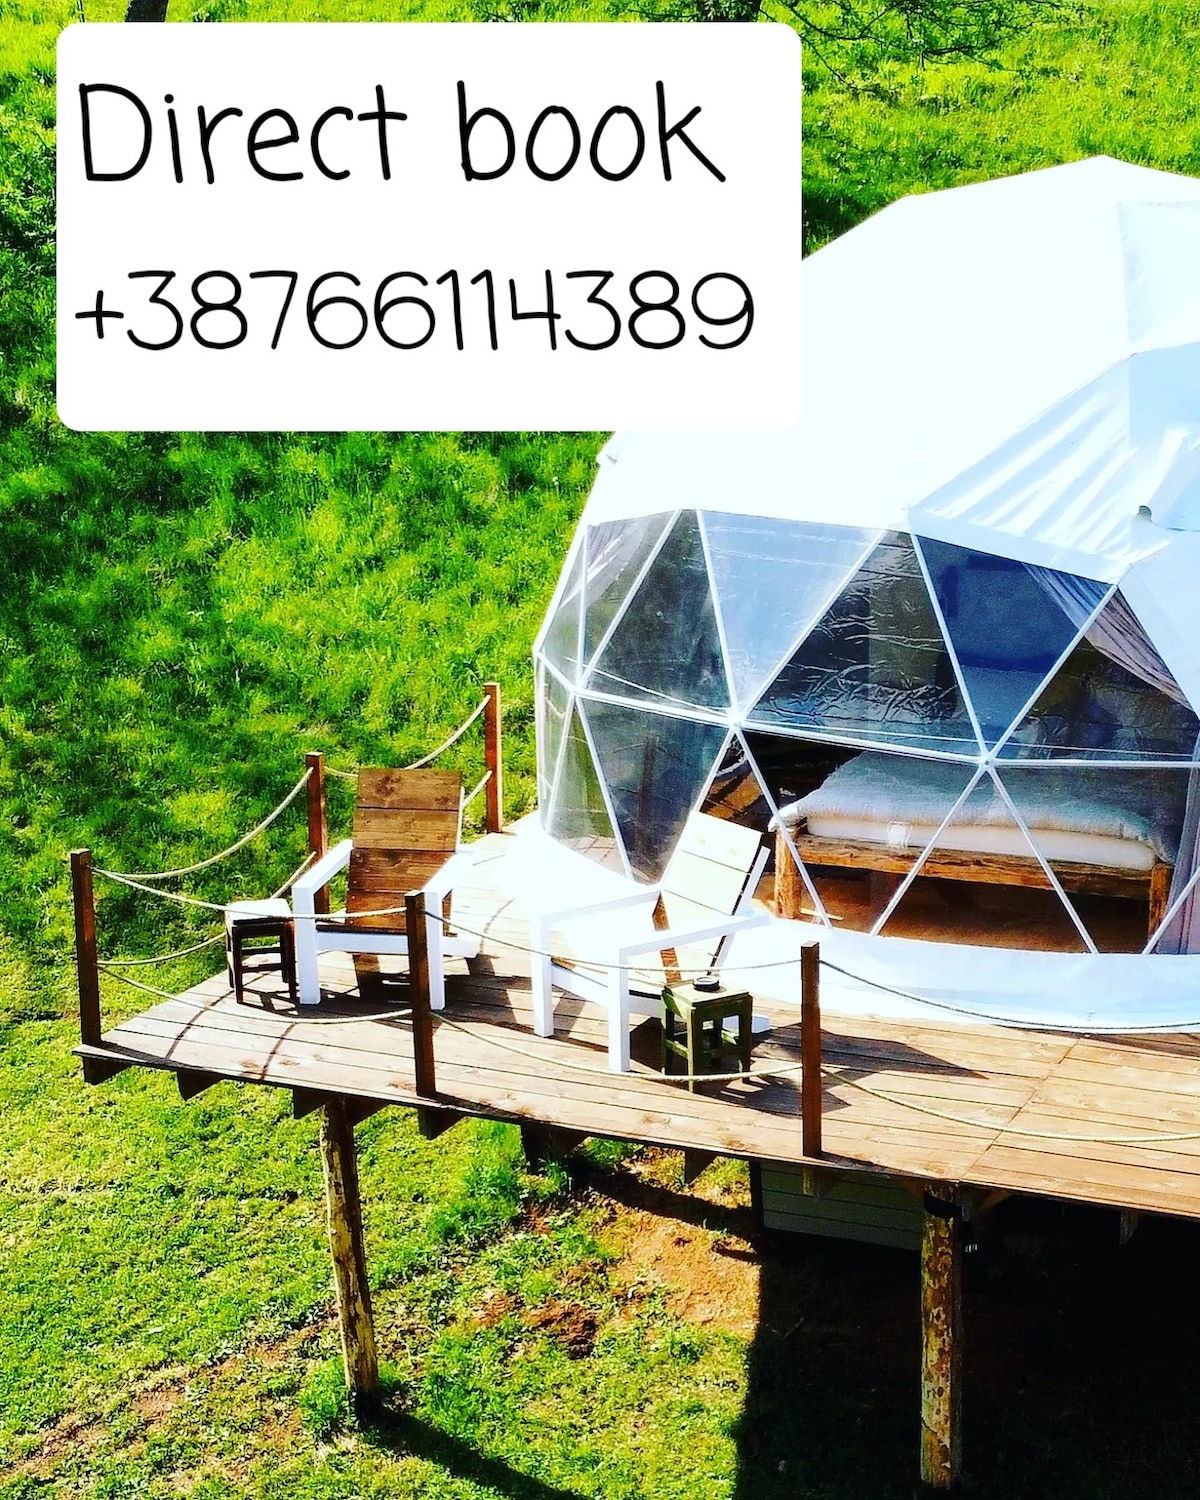 Nomad Glamping Dome 2